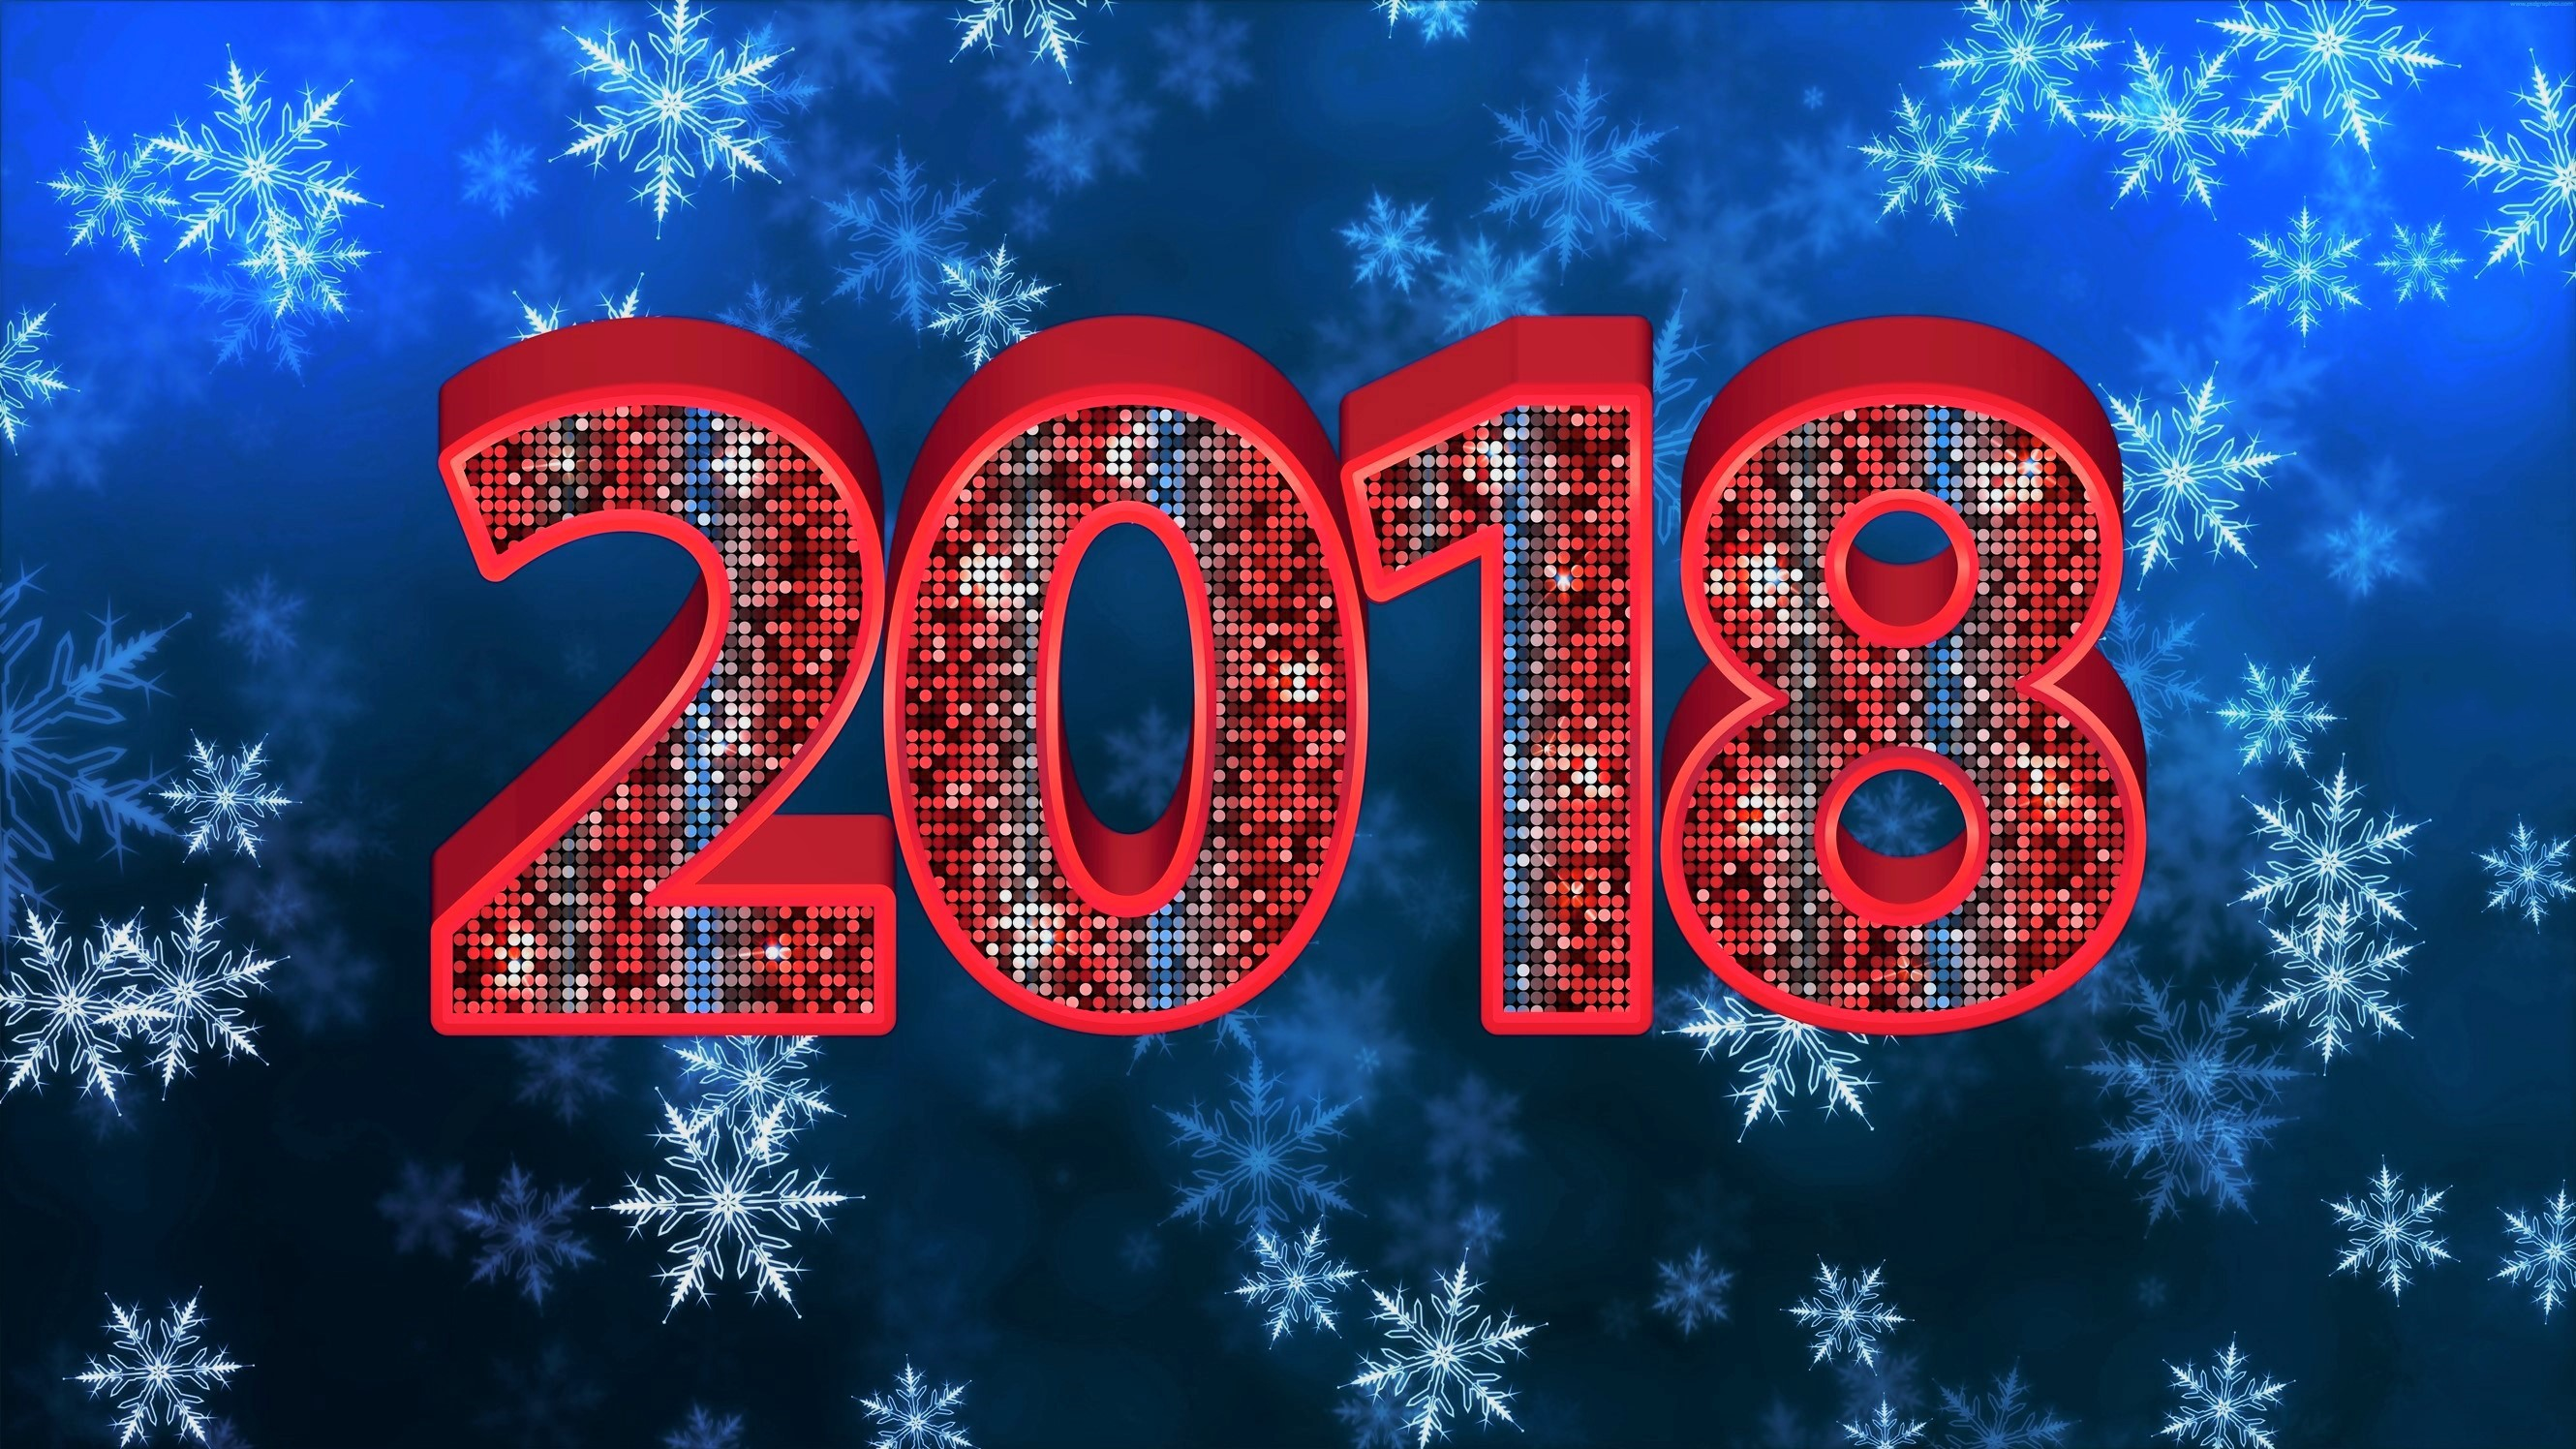 Blue Holiday New Year New Year 2018 Red Snowflake 2660x1496